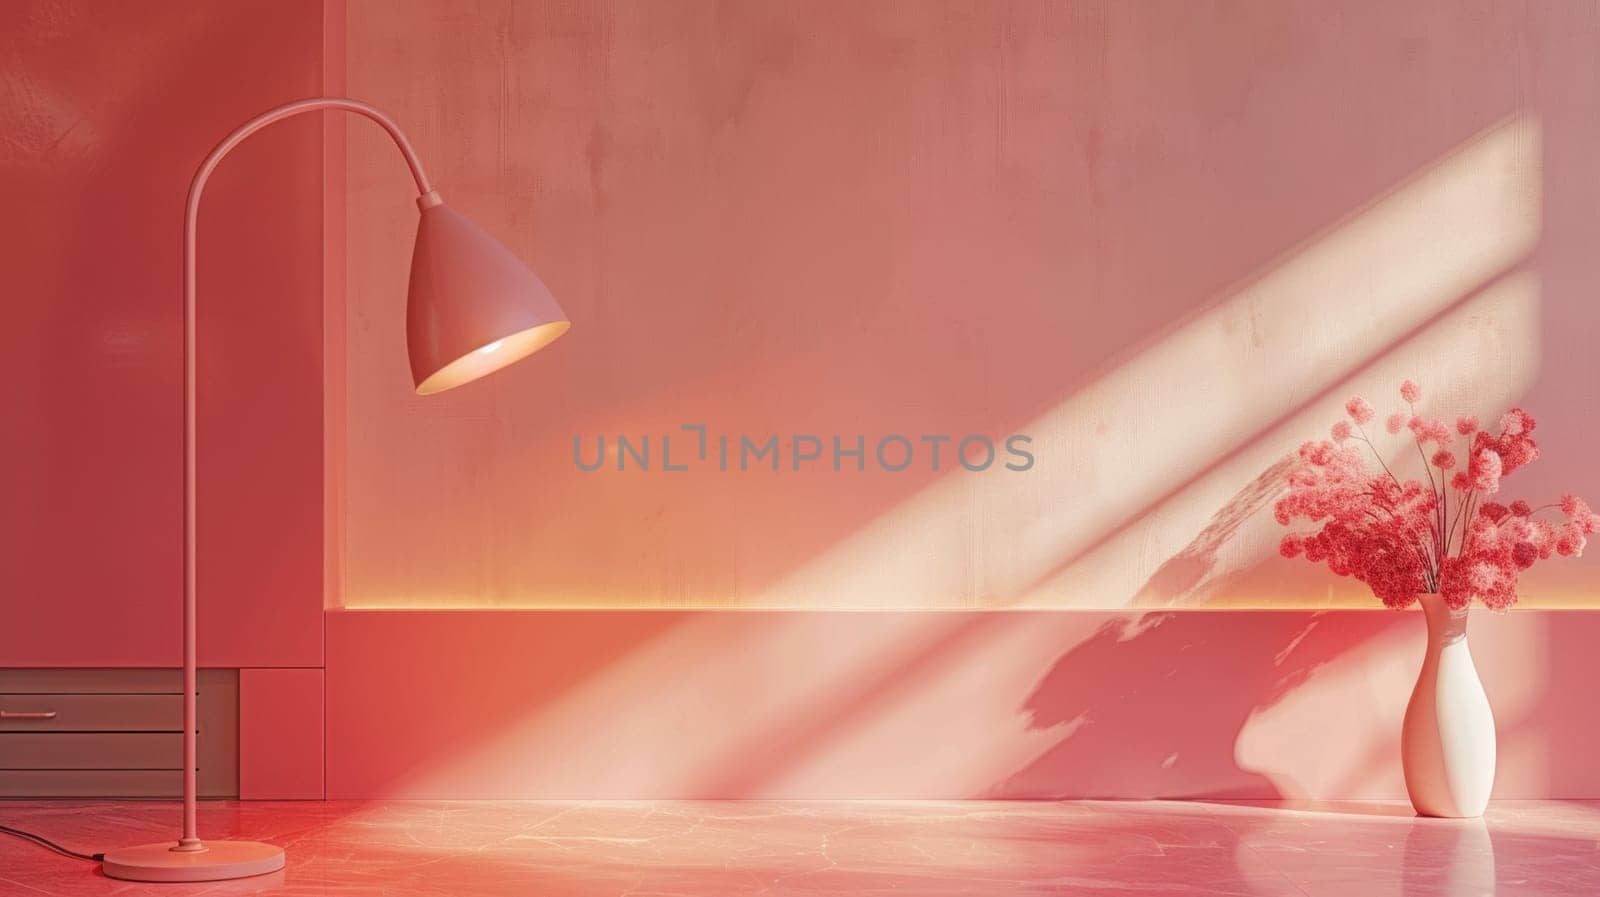 A lamp in a room with pink walls and flowers